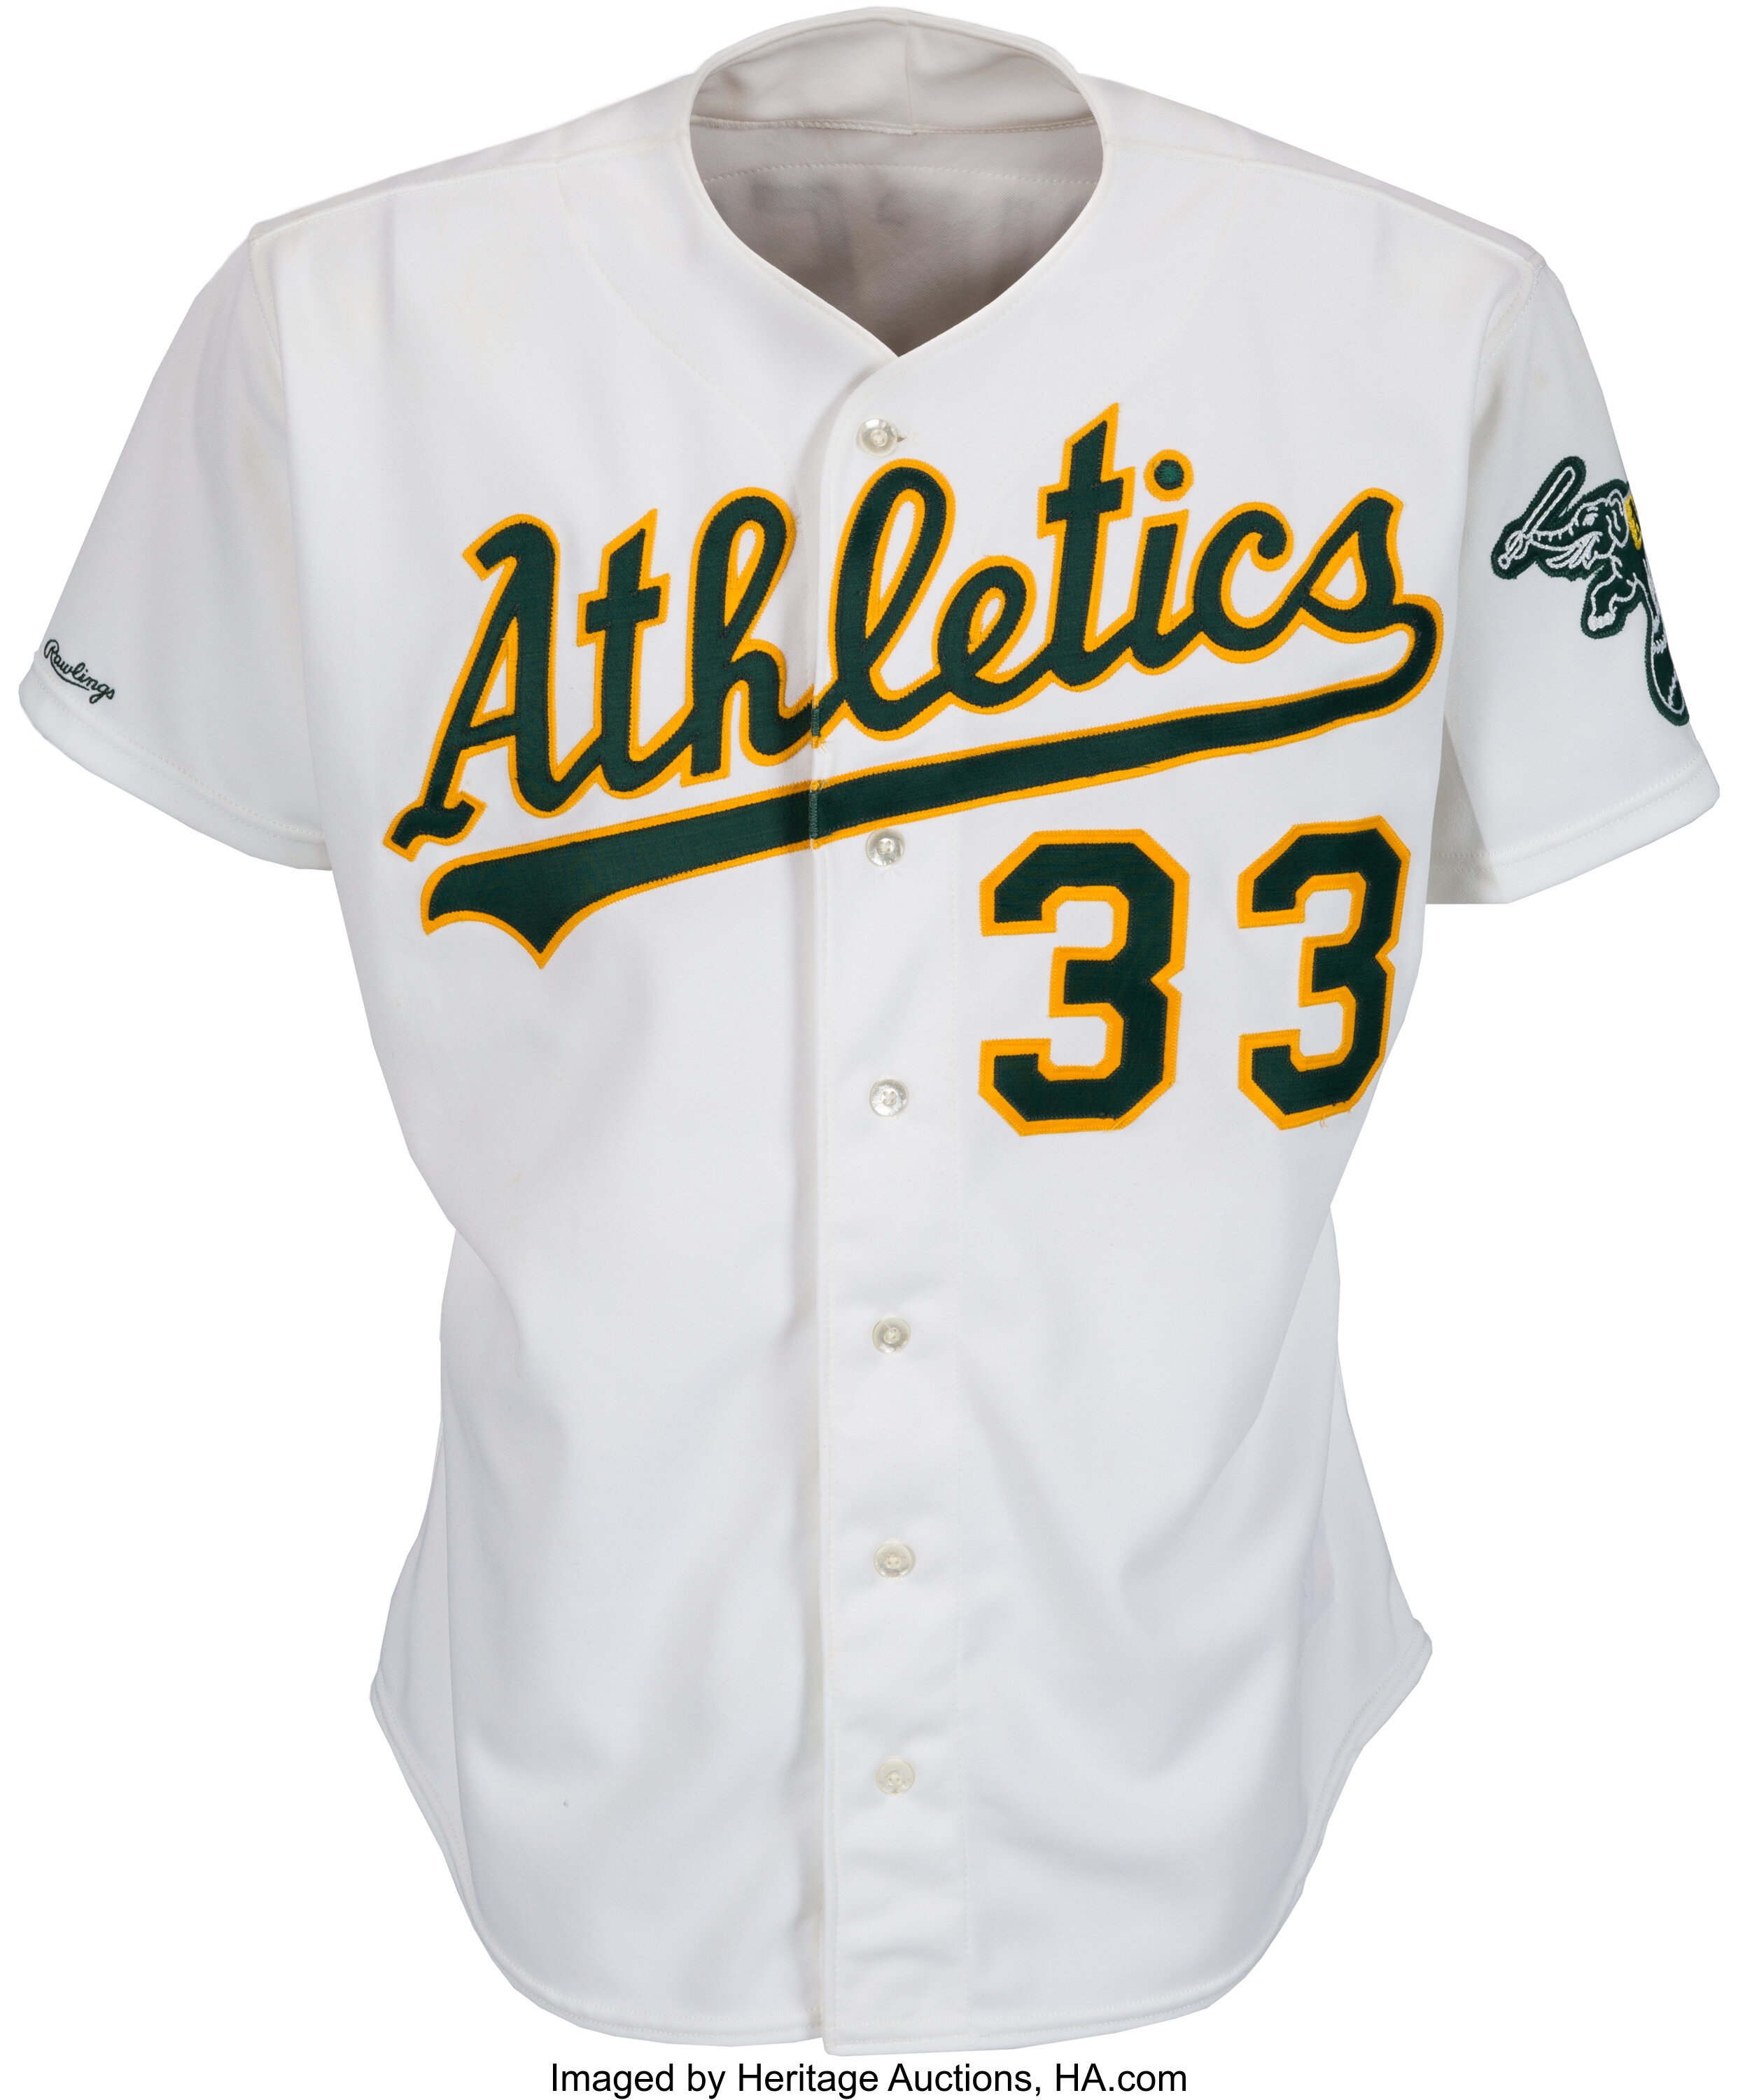 1990 Jose Canseco Game Worn Oakland Athletics Jersey. Baseball